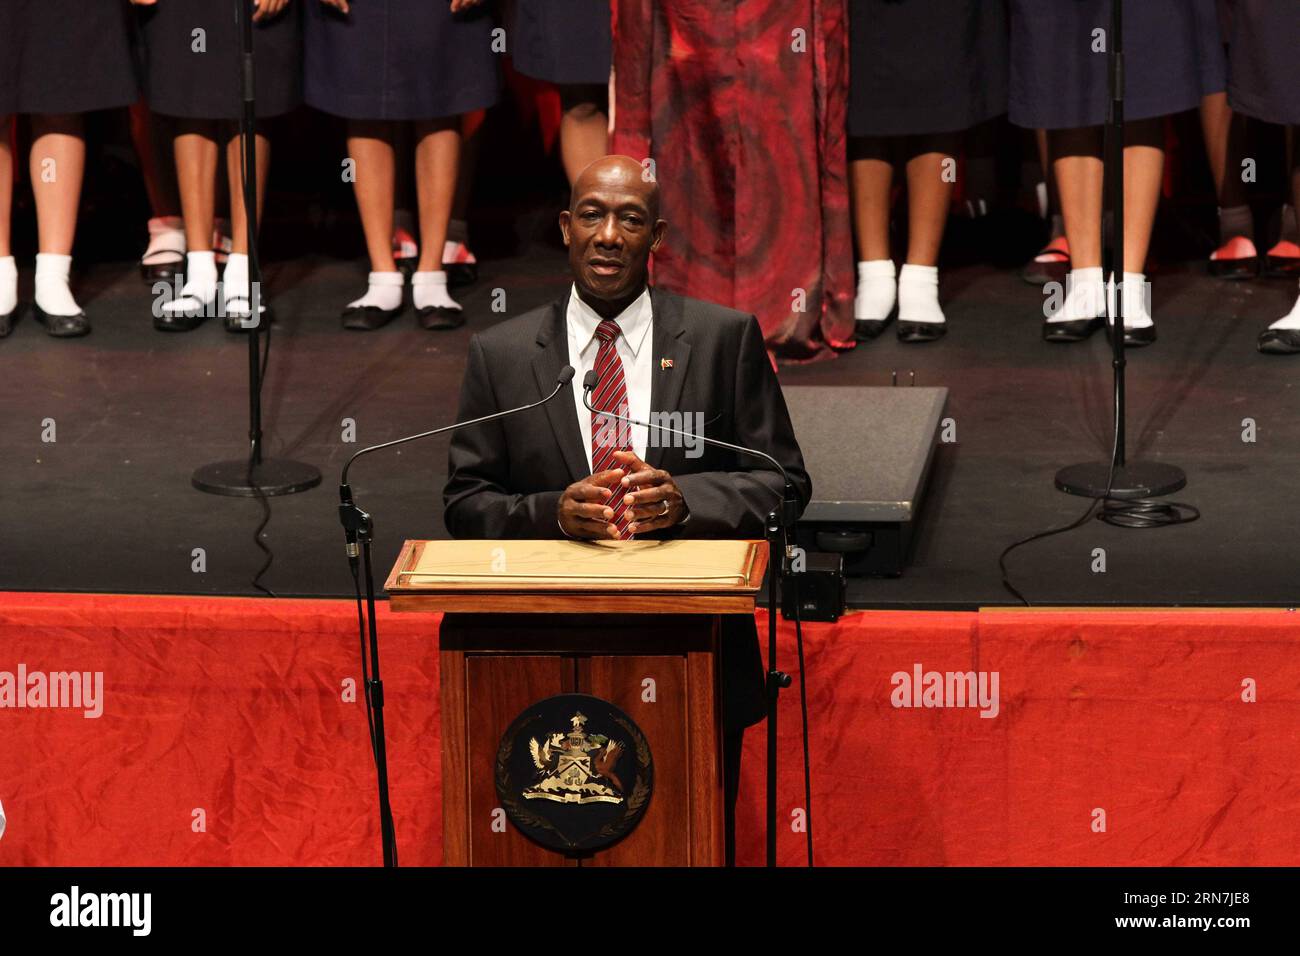 (150909) -- PORT OF SPAIN, Sept. 9, 2015 -- Trinidad and Tobago s People s National Movement (PNM) leader Keith Rowley, delivers a speech during his swearing-in ceremony as the country s new prime minister in Port of Spain, capital of Trinidad and Tobago, on Sept. 9, 2015. Trinidad and Tobago s People s National Movement (PNM) leader Keith Rowley was sworn in Wednesday as the country s new prime minister by President Anthony Carmona in a ceremony held here. ) (fnc) TRINIDAD AND TOBAGO-PORT OF SPAIN-PM-INAUGURATION GaoxXing PUBLICATIONxNOTxINxCHN   150909 Port of Spain Sept 9 2015 Trinidad and Stock Photo